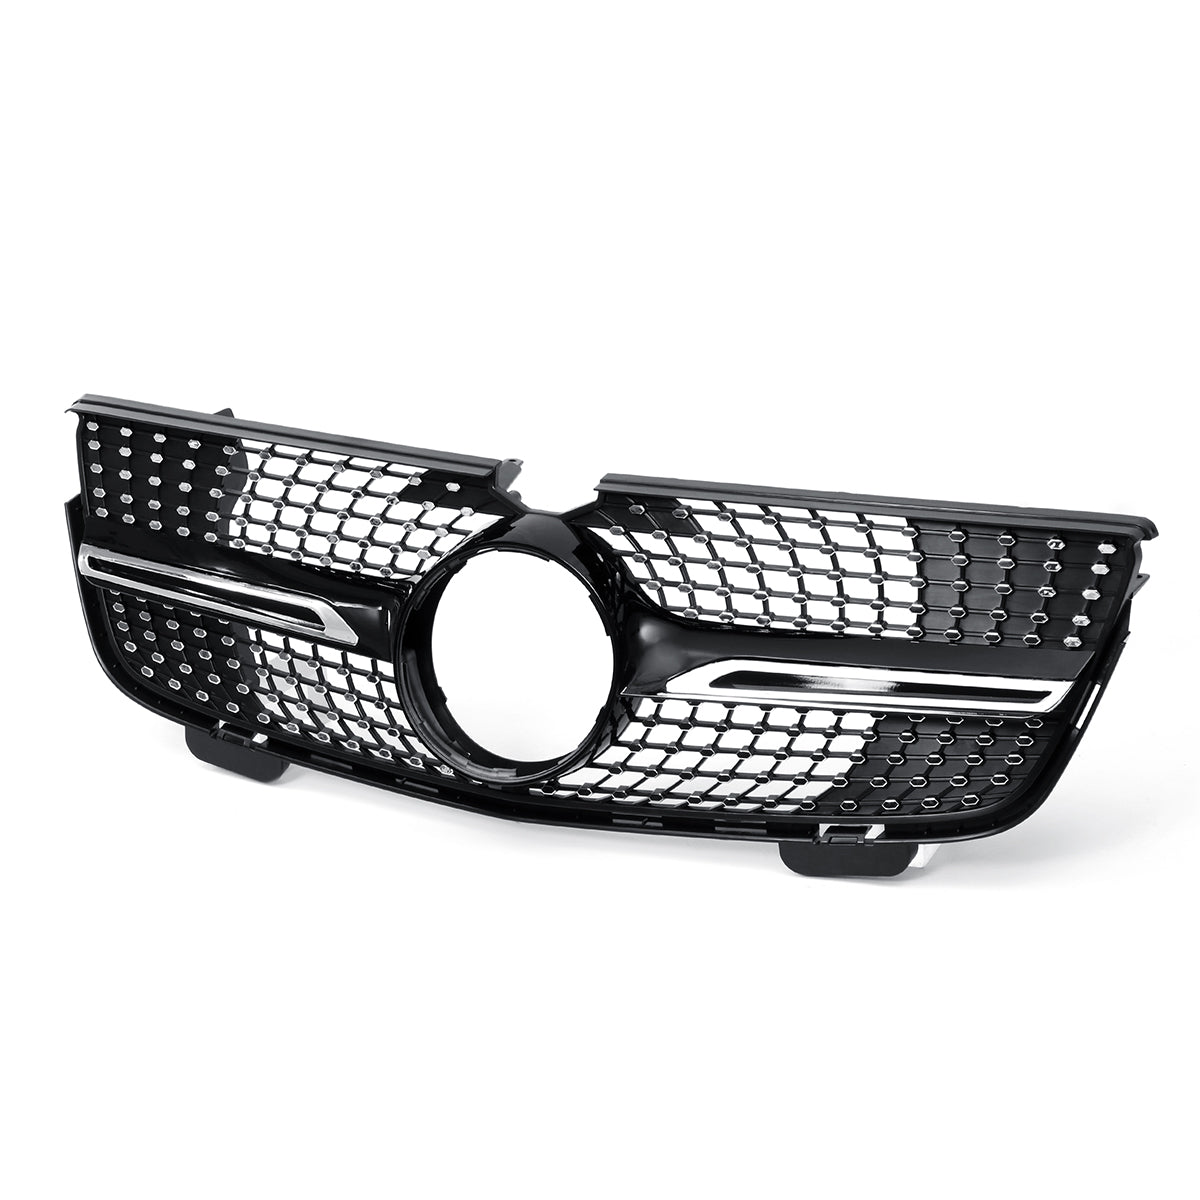 Black Black Diamond Style Front Grille Grill For Mercedes-Benz GL-Class X164 GL320/350/450